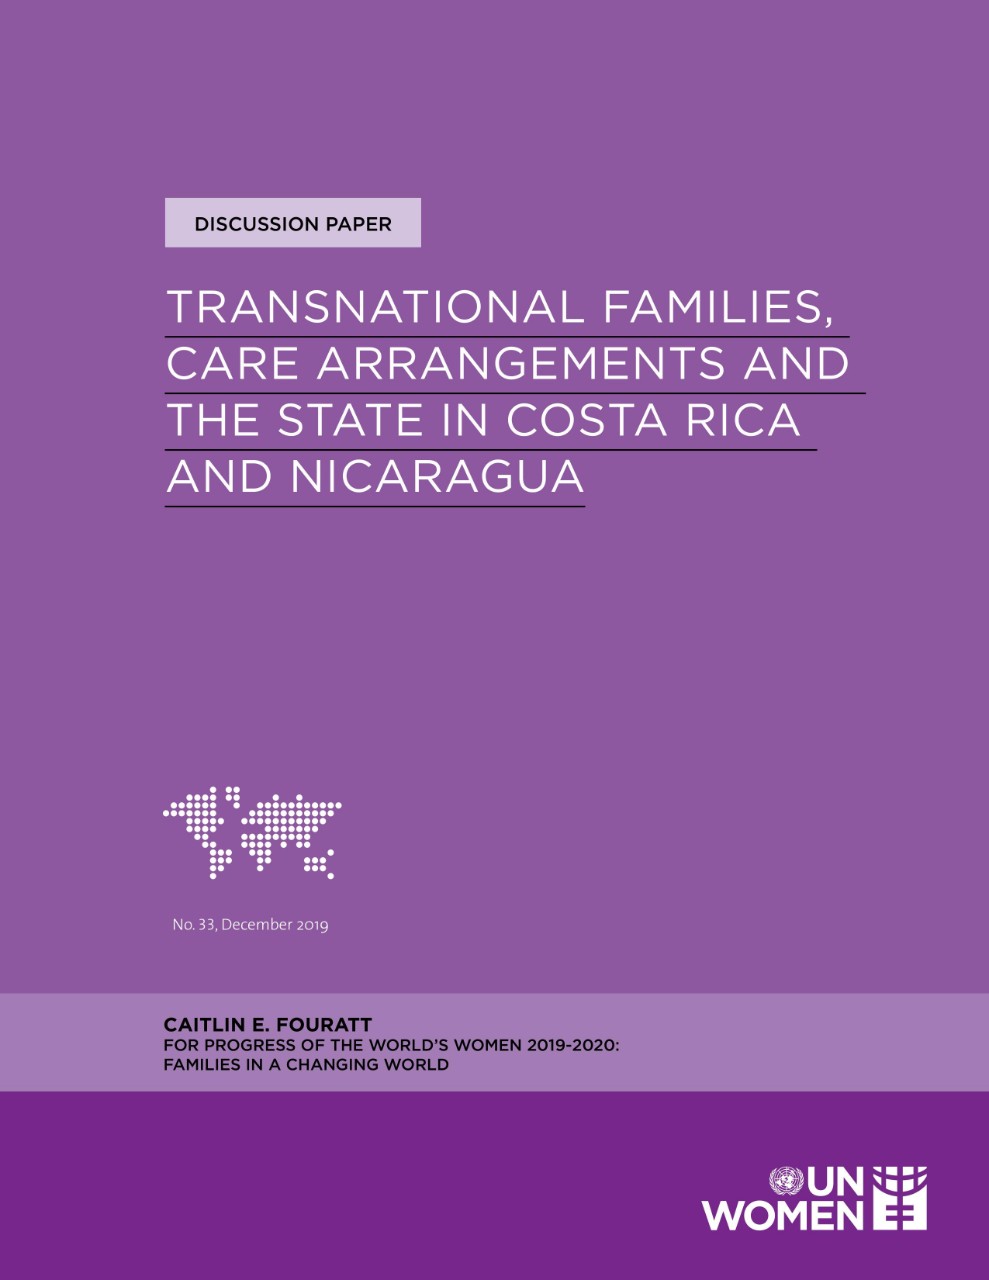 Transnational families, care arrangements and the state in Costa Rica and Nicaragua